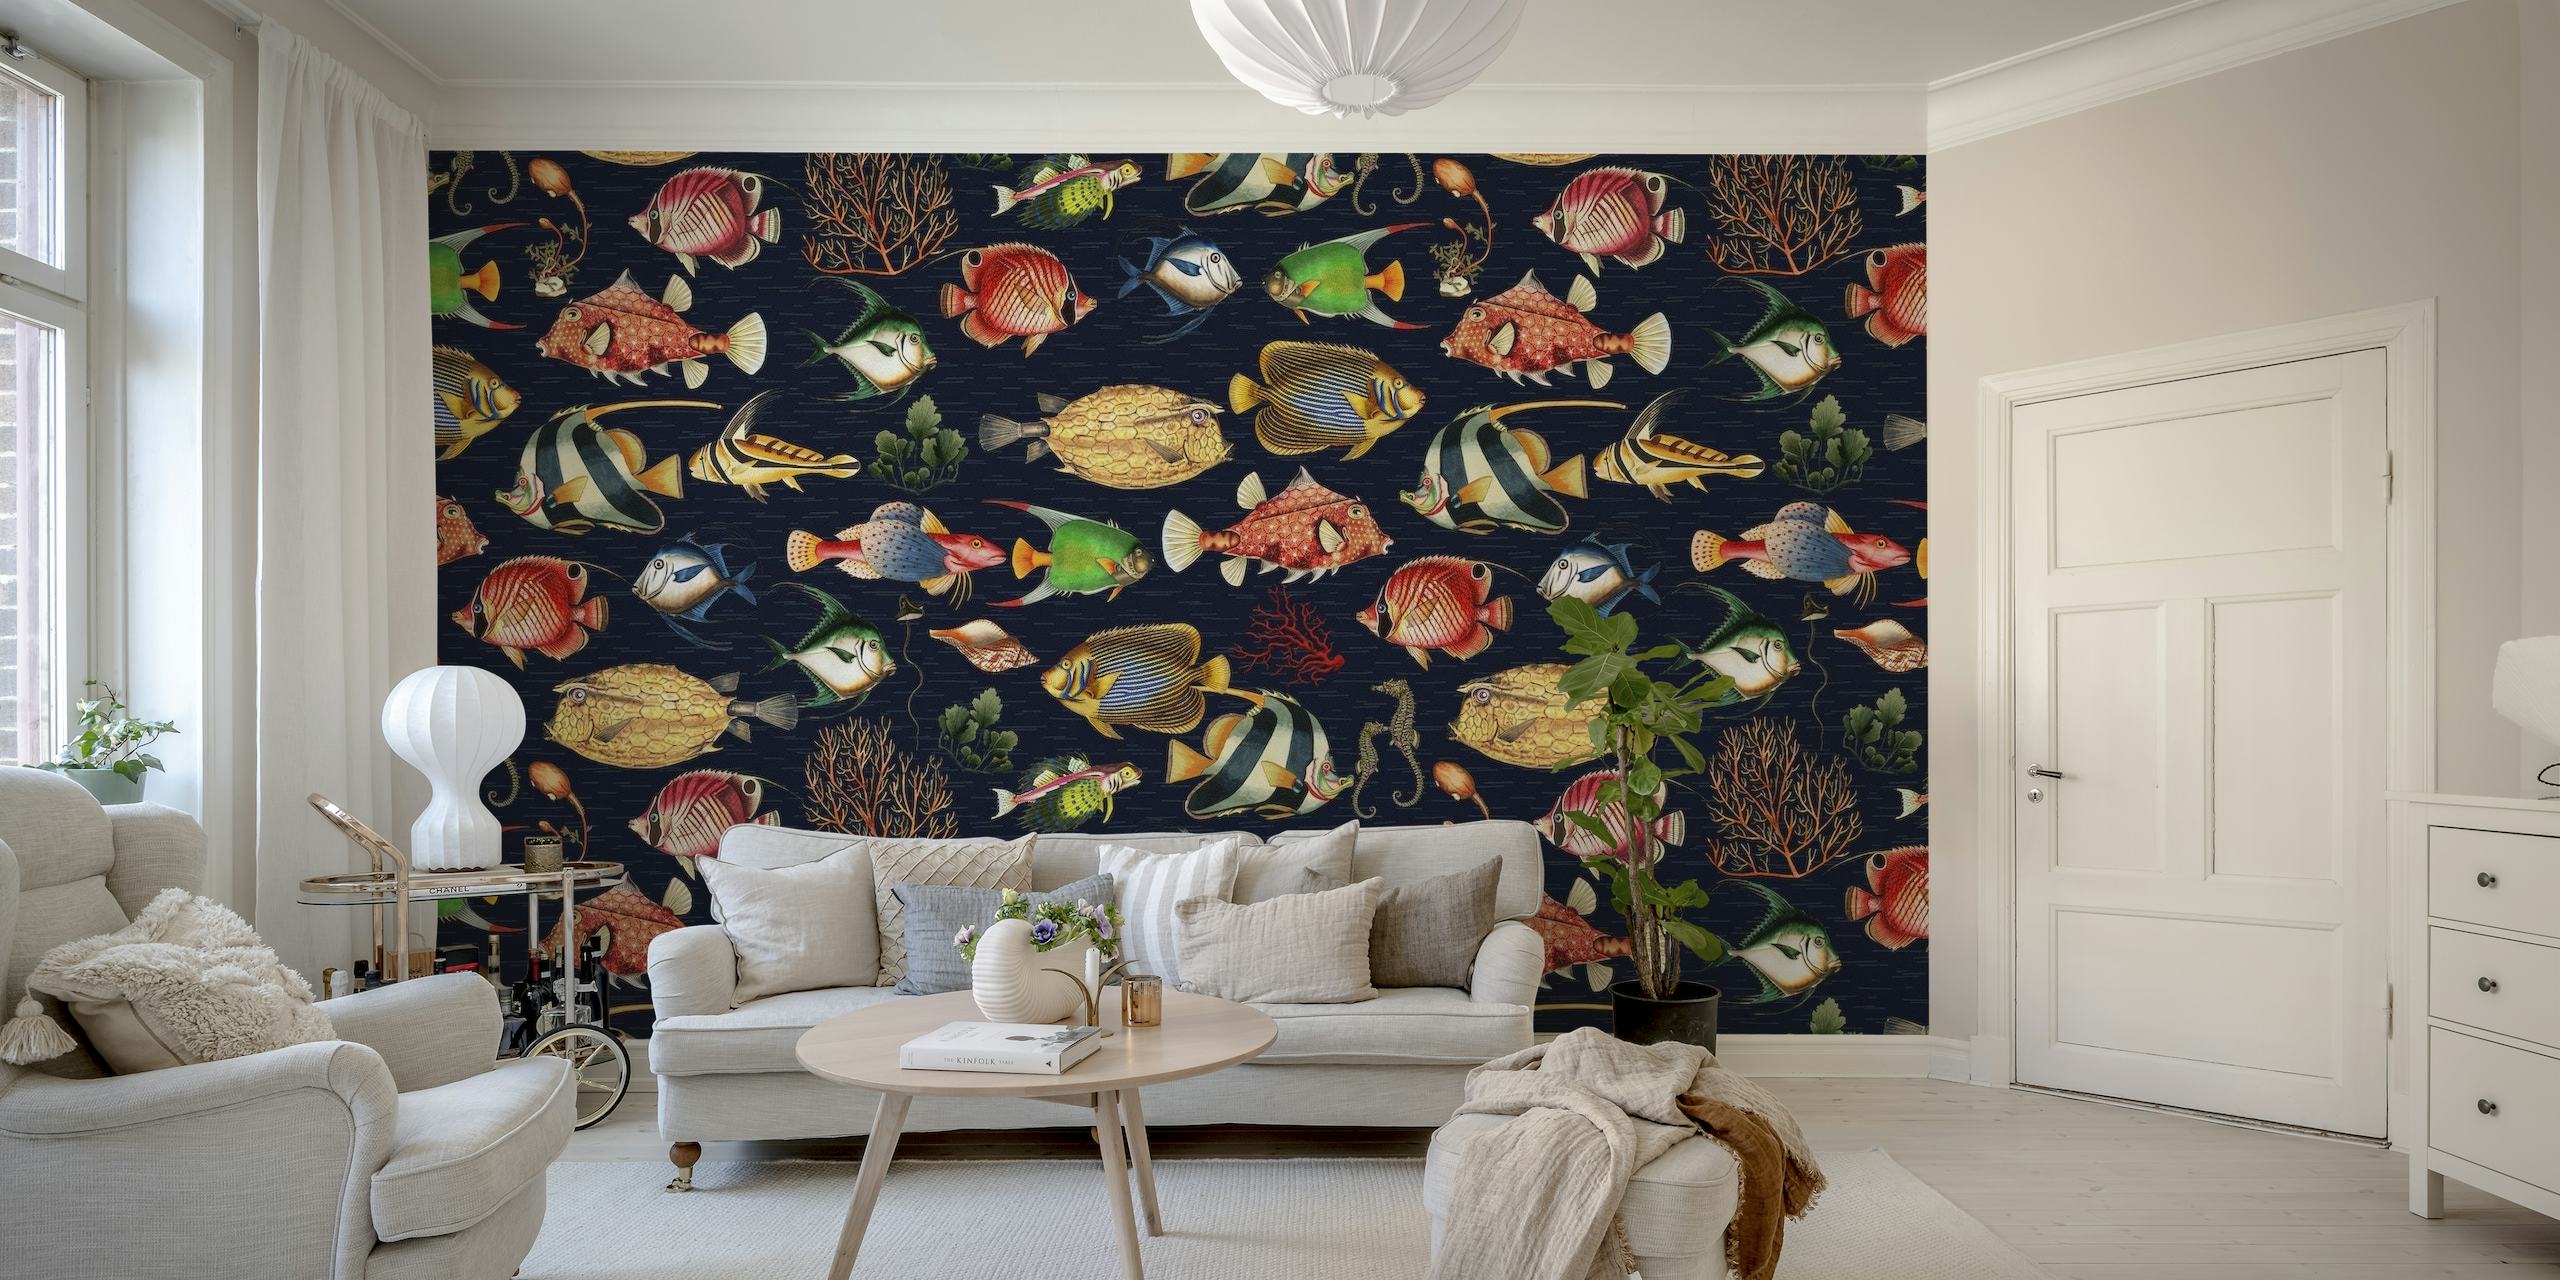 Ocean-themed wall mural with a pattern of tropical fish in navy blue tones